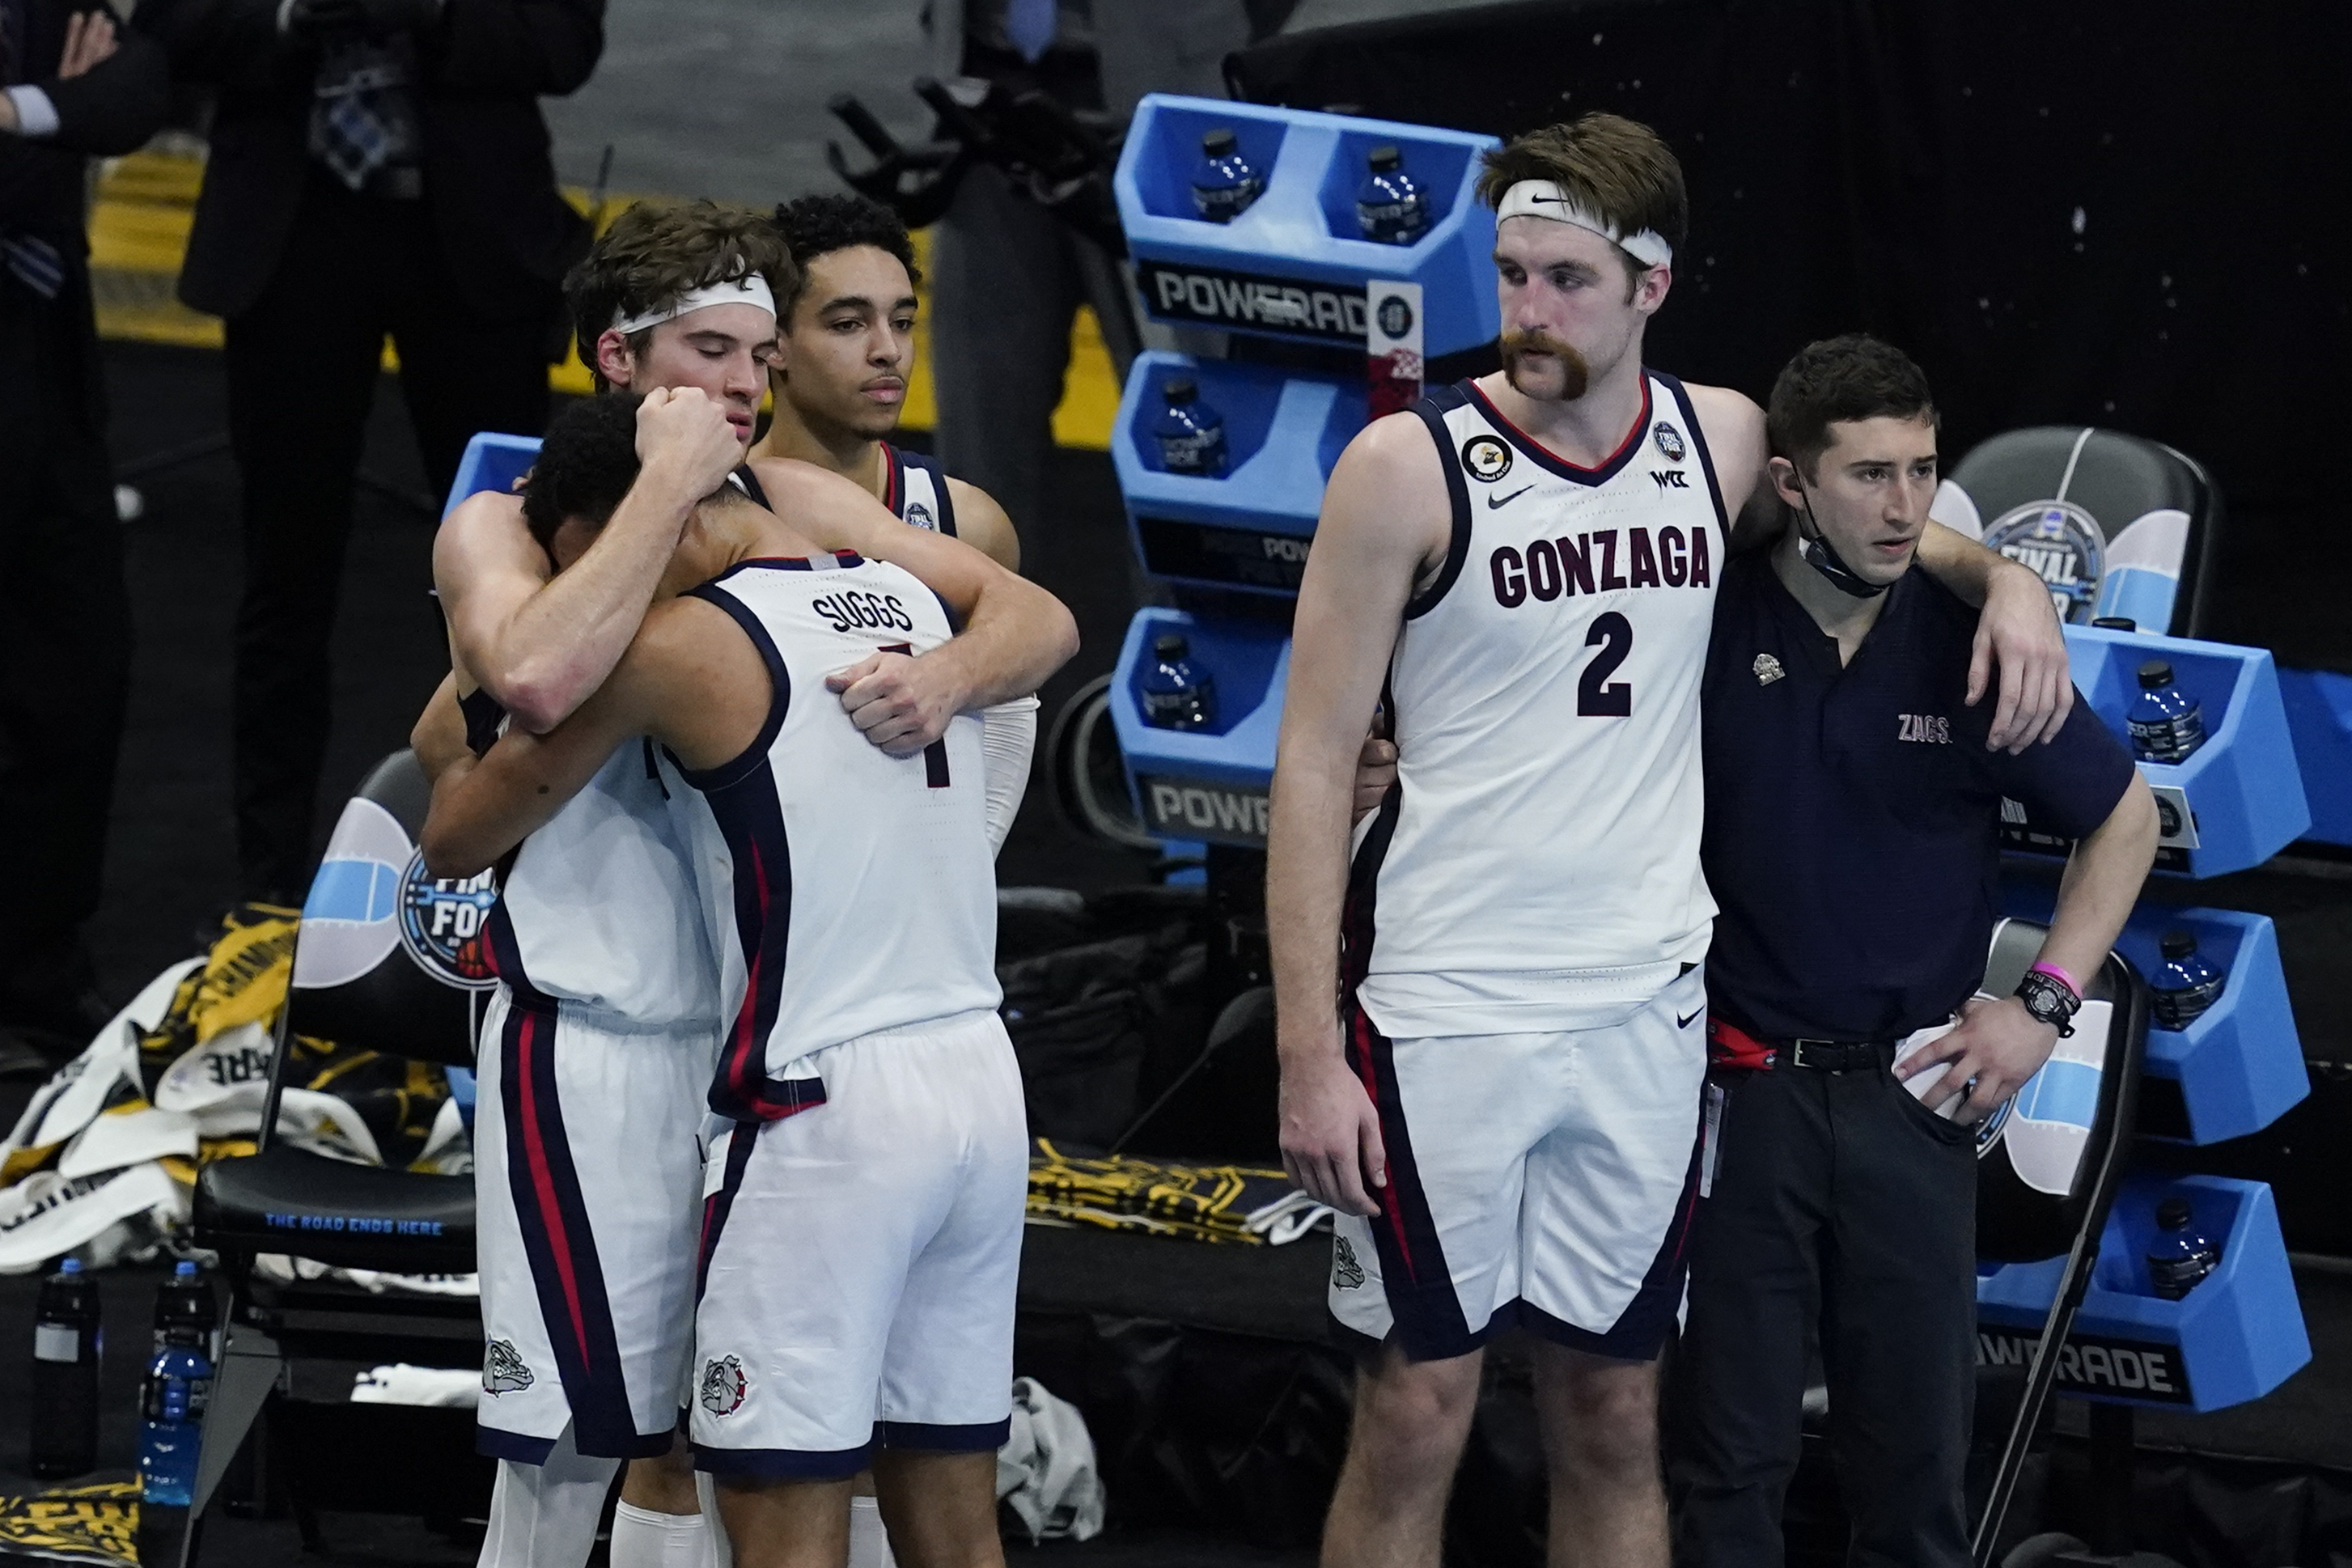 Kaden Perry leaves Gonzaga basketball team due to back injury